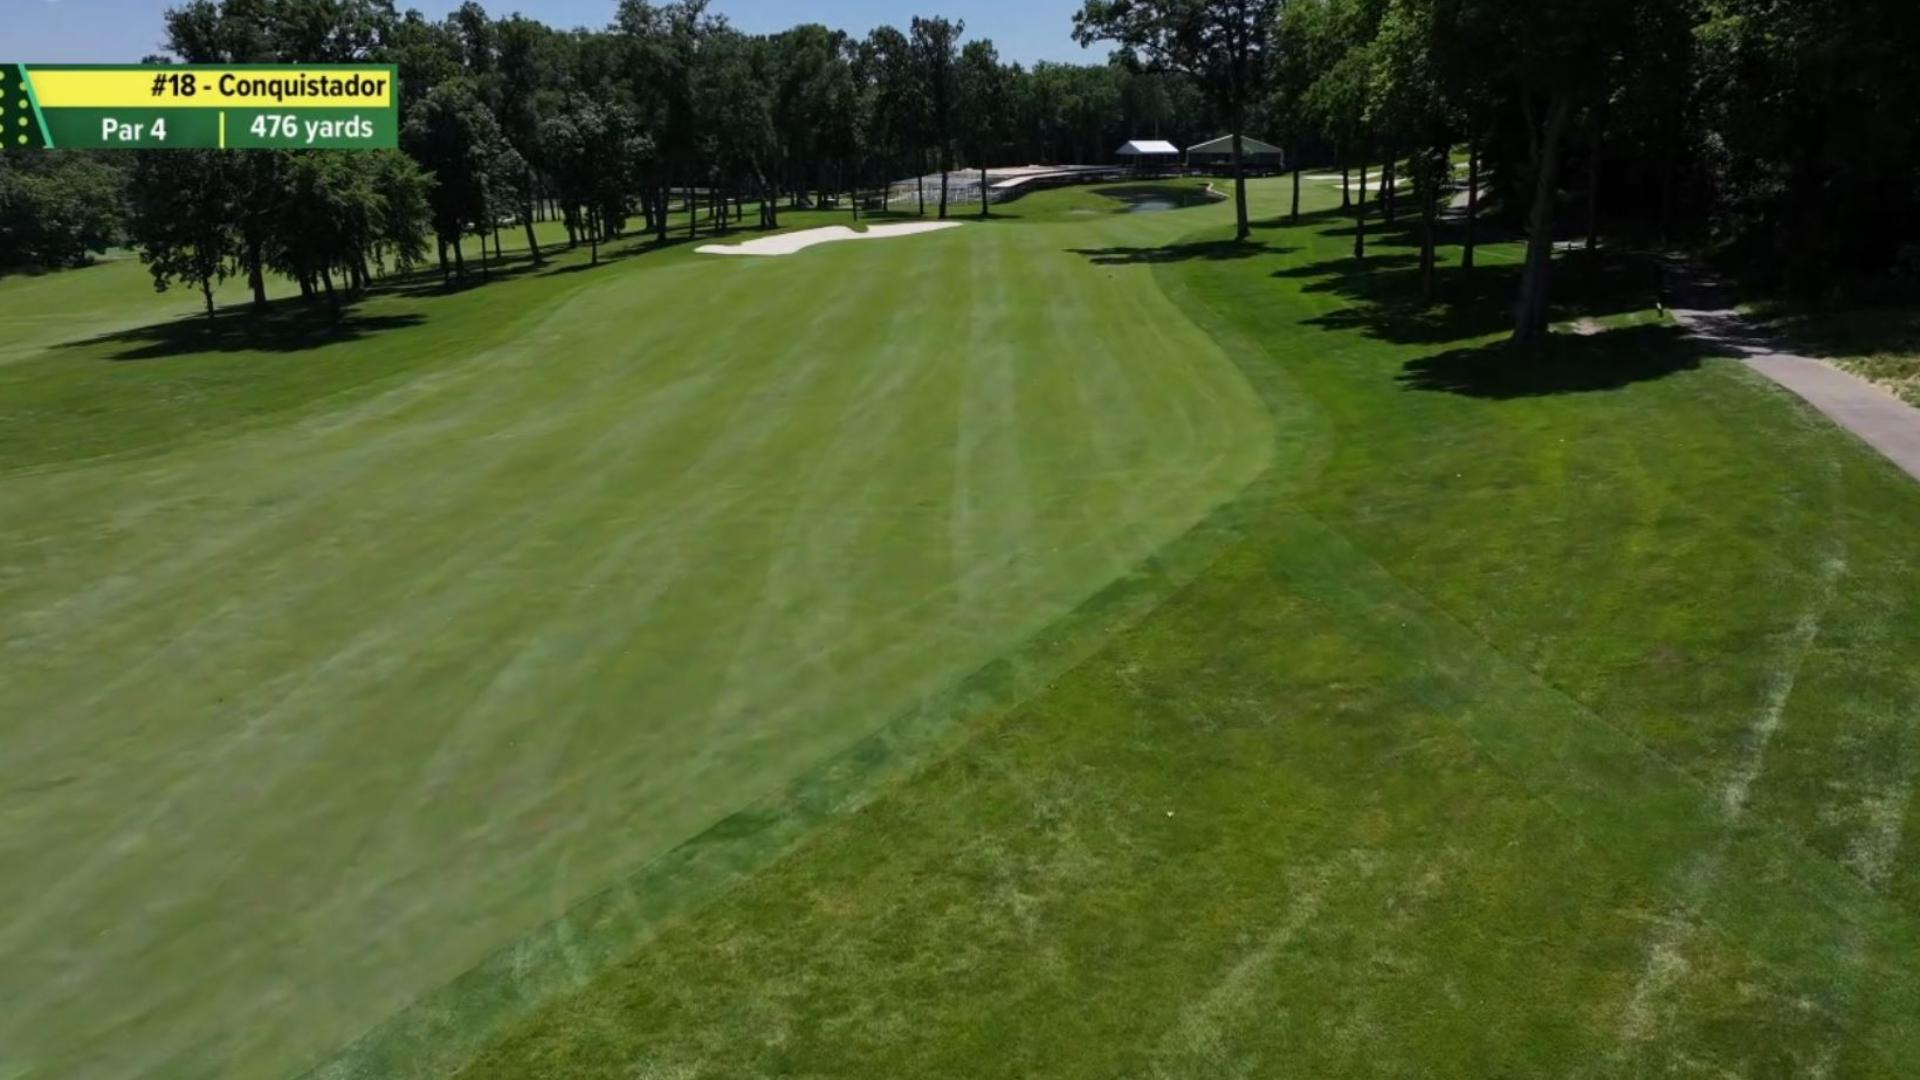 It's time for the John Deere Classic! Over the past 18 days, News 8 has given a birds-eye view of each hole at TPC Deere Run. Here's the final one.